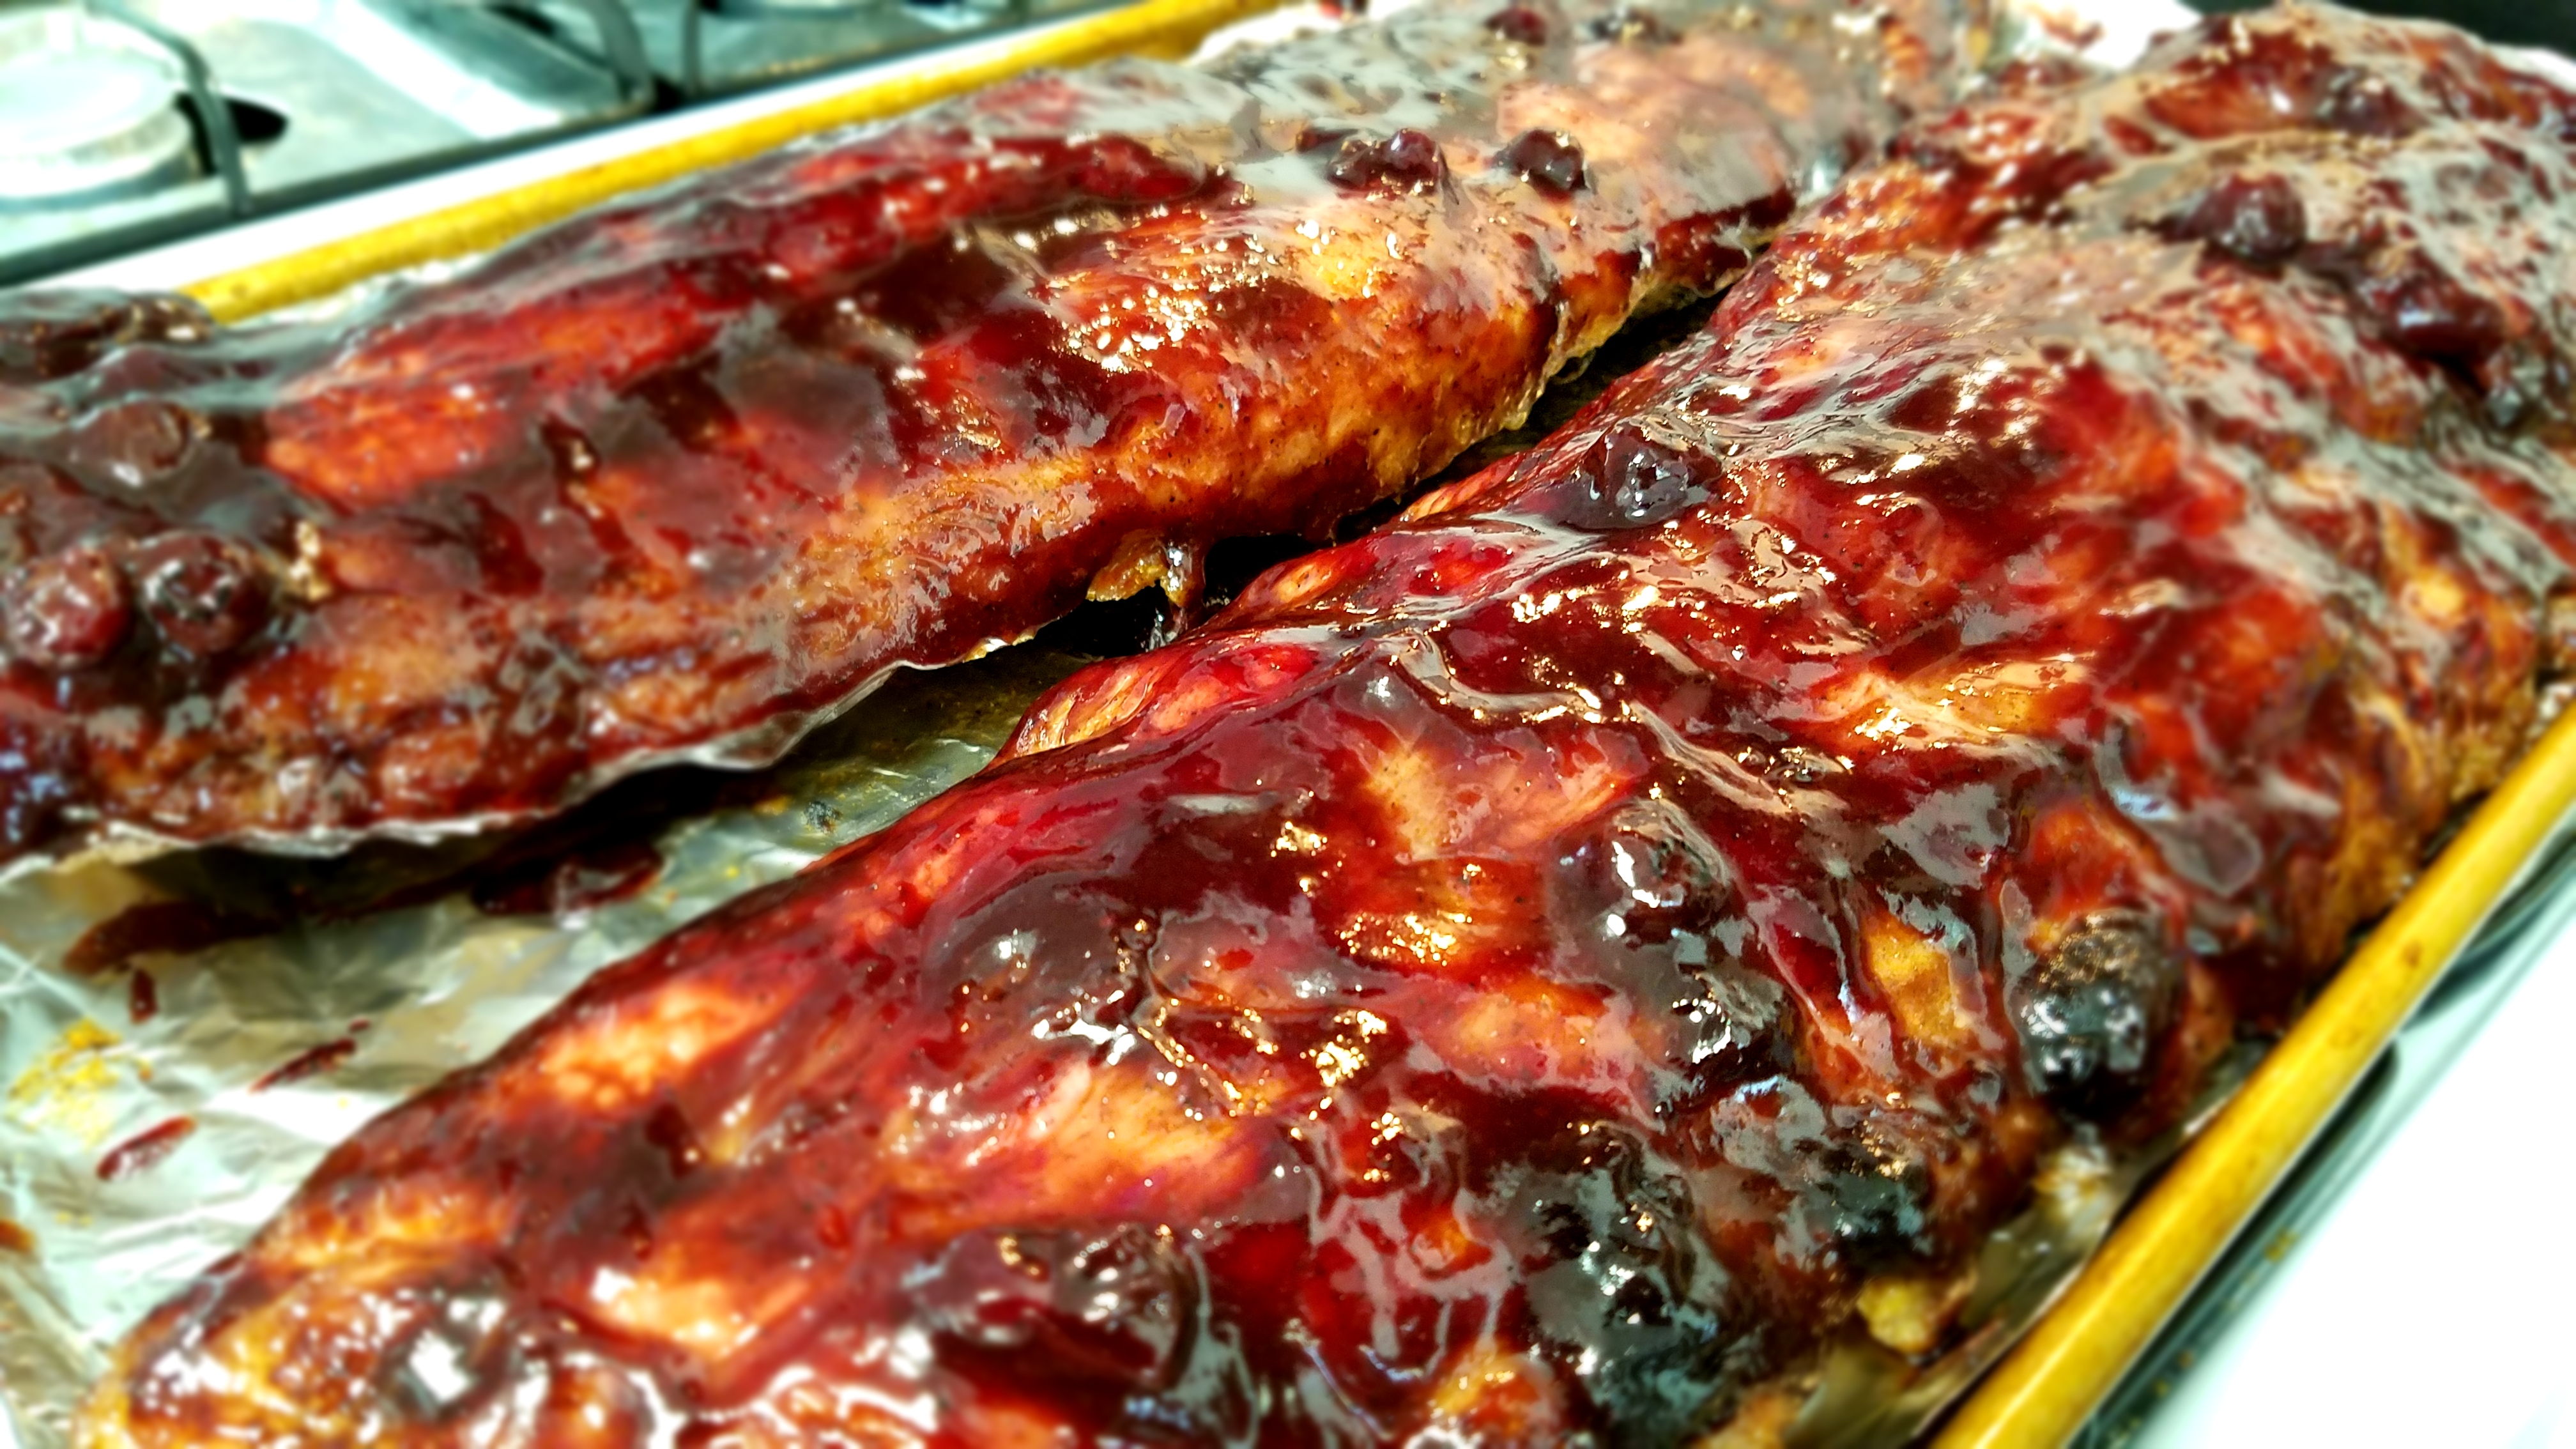 How To Make BBQ Ribs With Sweet-And-Savoury Blueberry Sauce